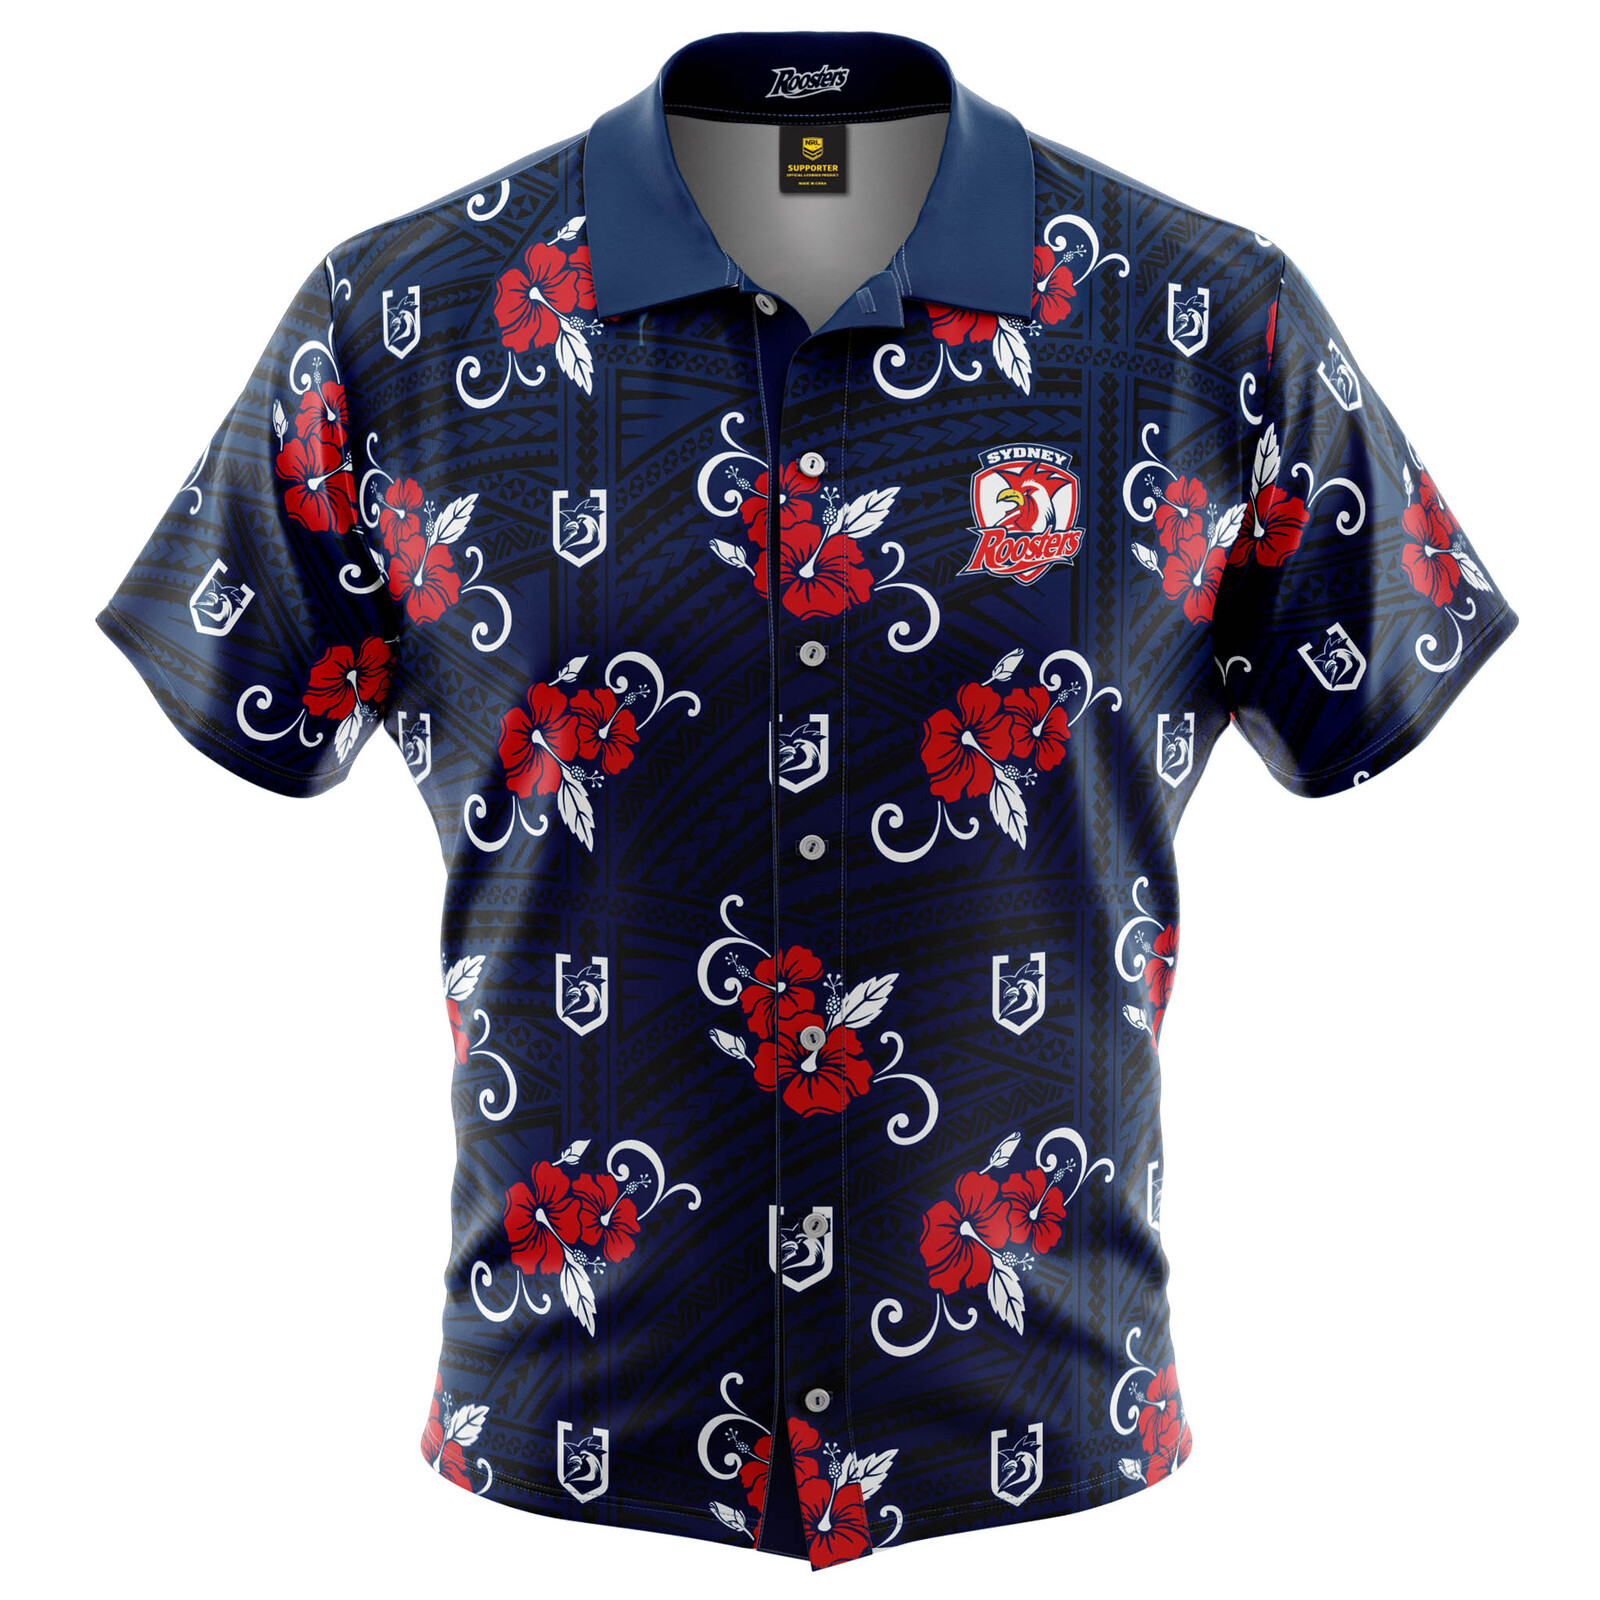 Sydney Roosters NRL Tribal Hawaiian Shirt Button Up Polo Shirt Sizes S-5XL!